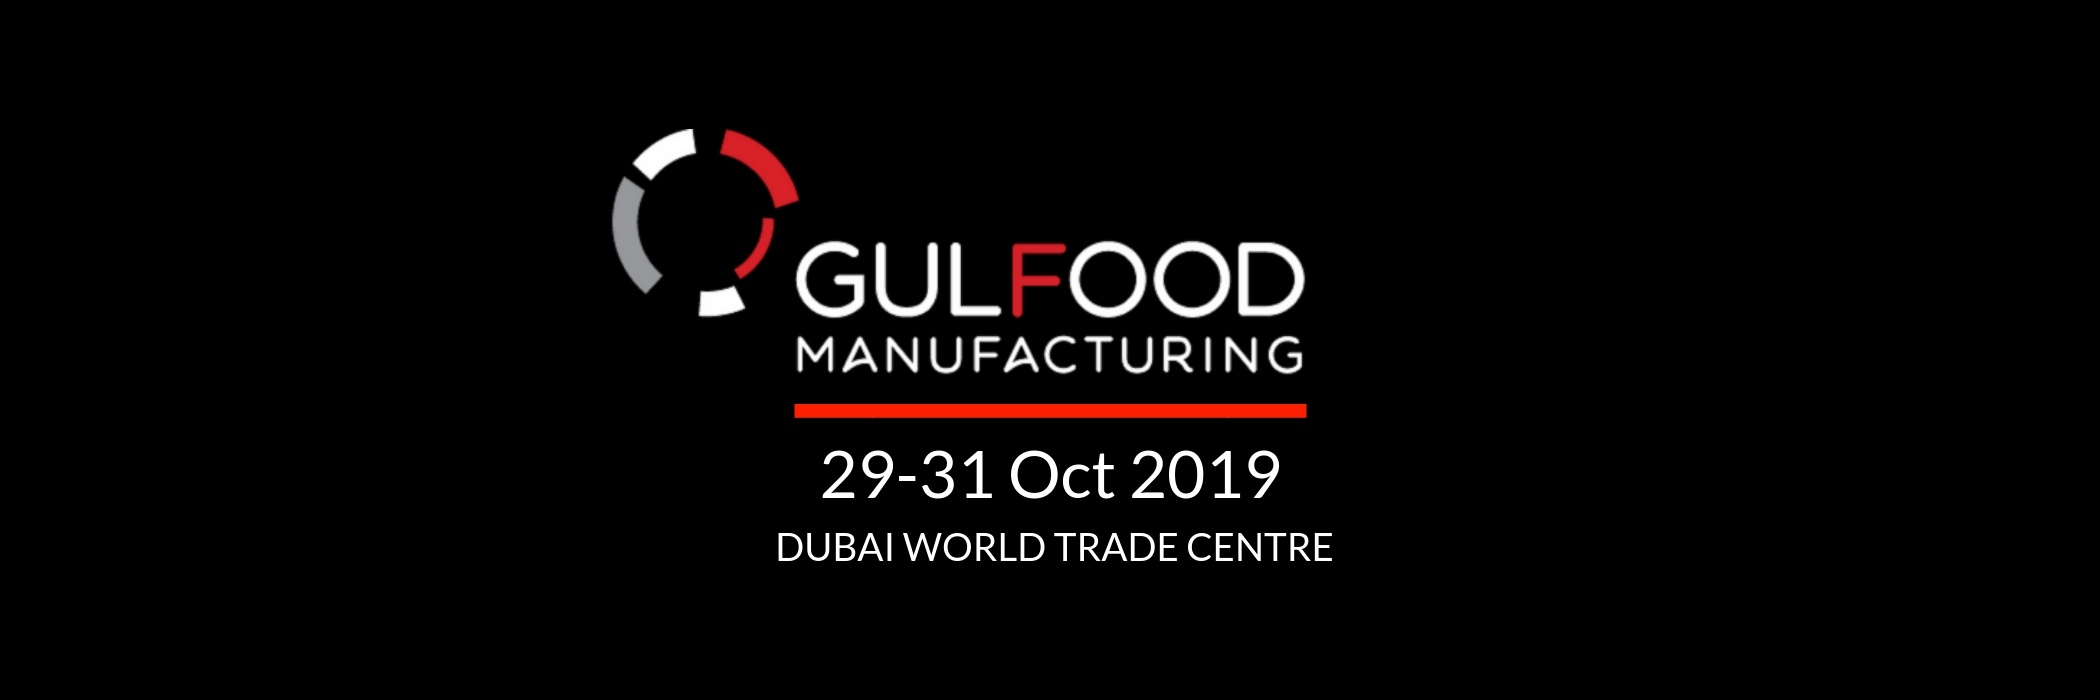 Gulfood Manufacturing 2019 on Oct 29th to 31st at Dubai World Trade Centre